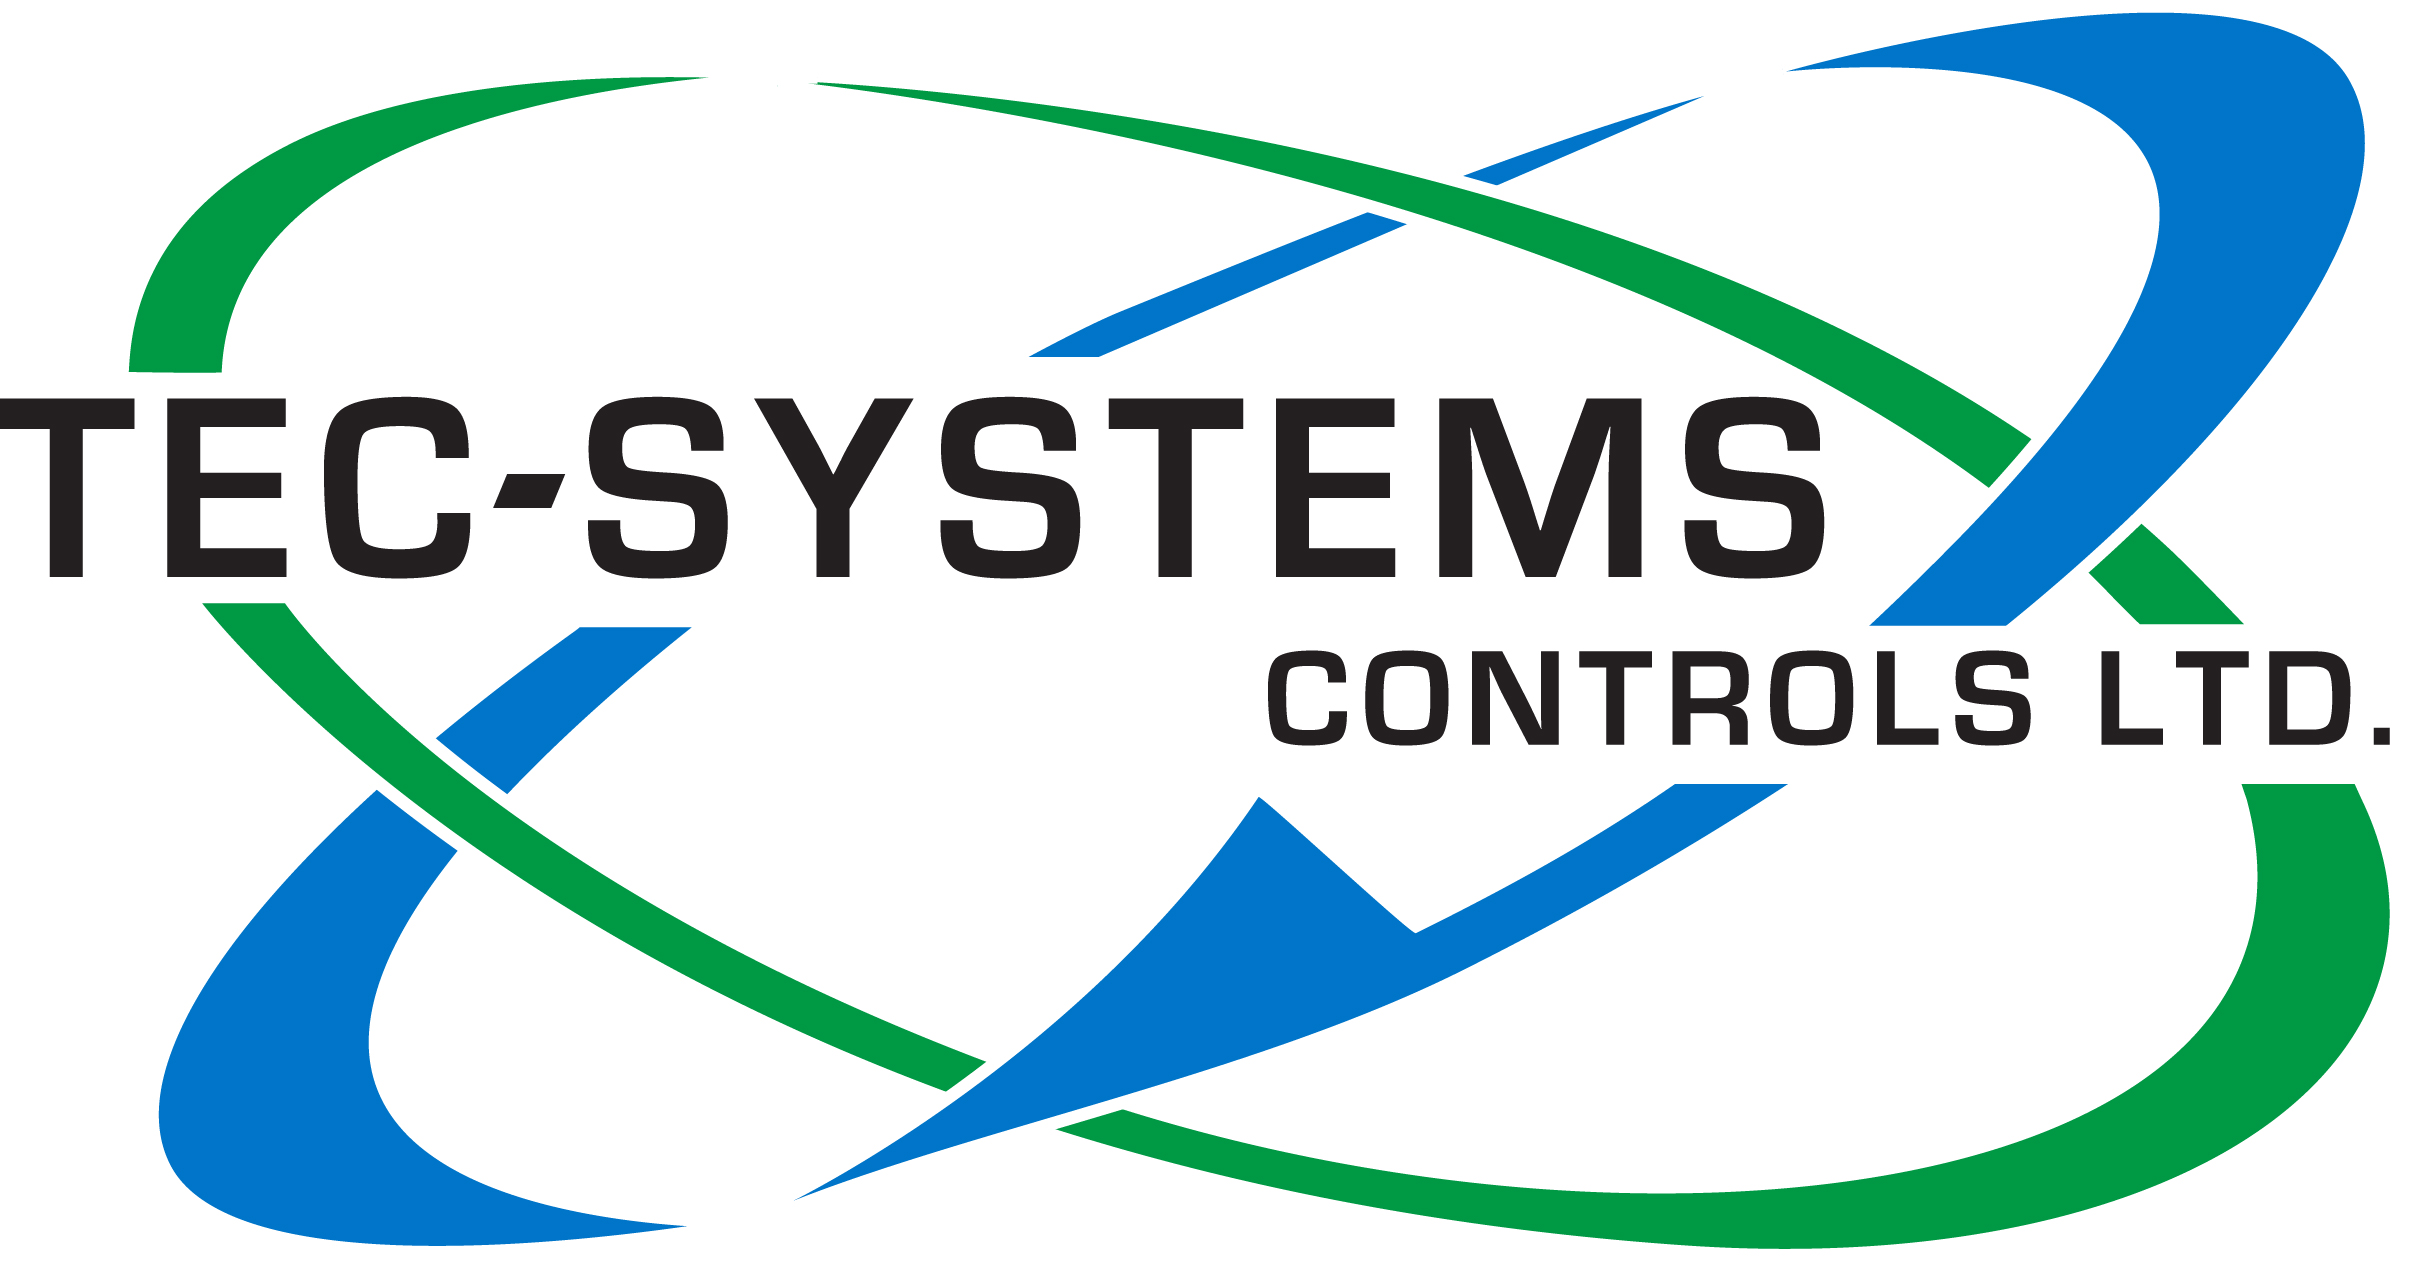 Tec Systems